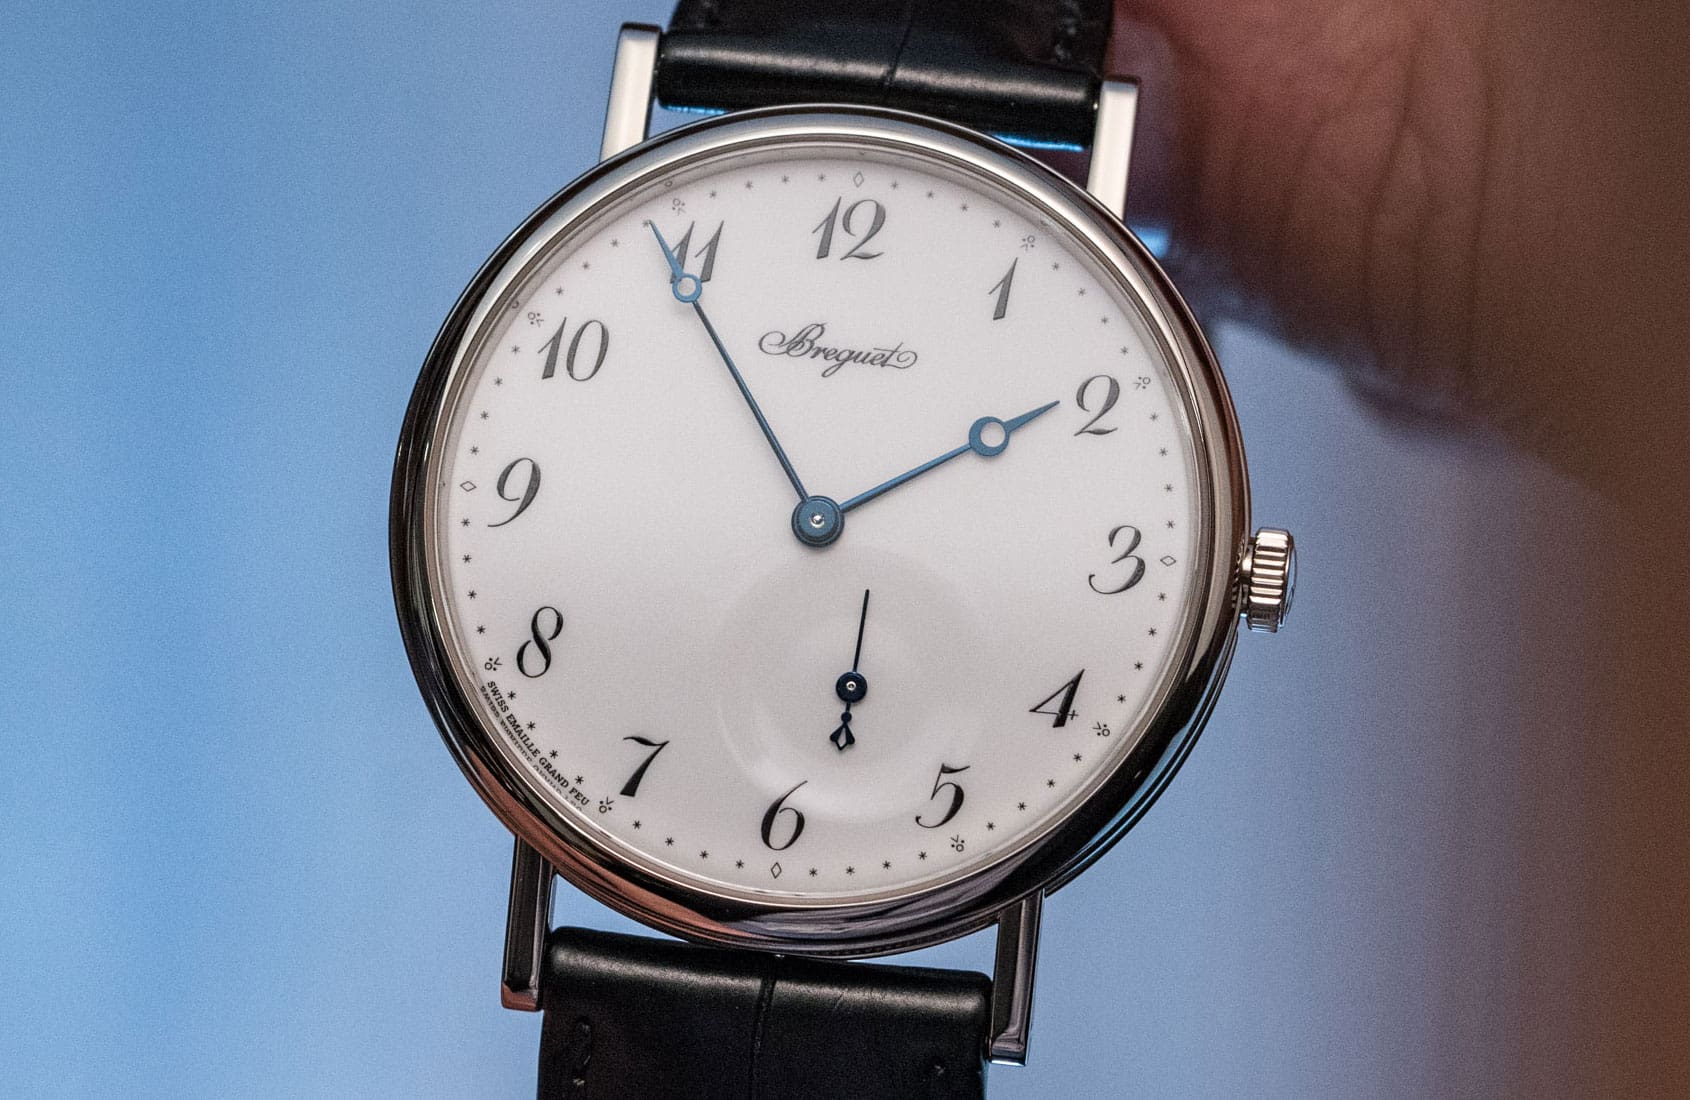 Taking another look at the Breguet Classique 7147